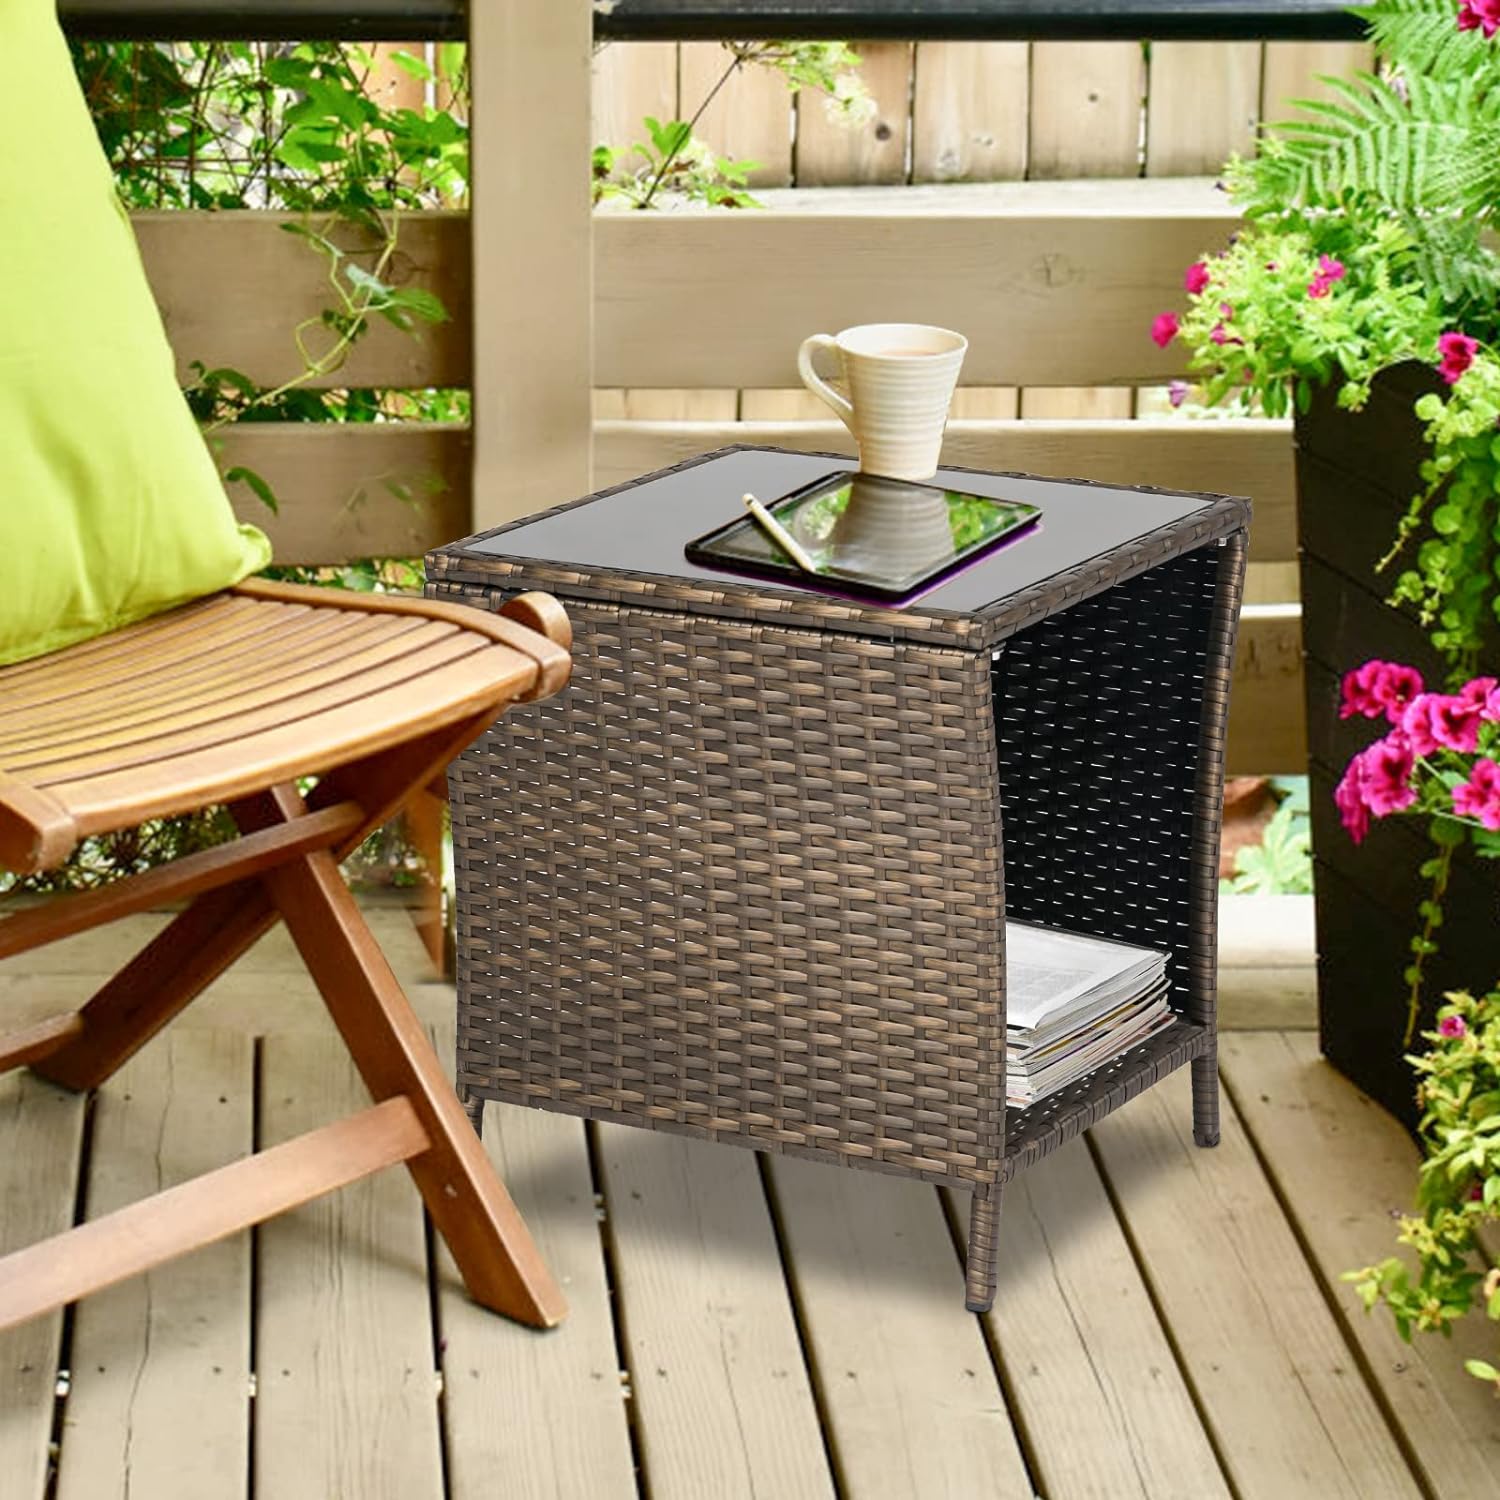 Kinbor Patio Wicker Rattan Side Table Outdoor Square Tempered Glass Top with Storage, Brown - image 3 of 8